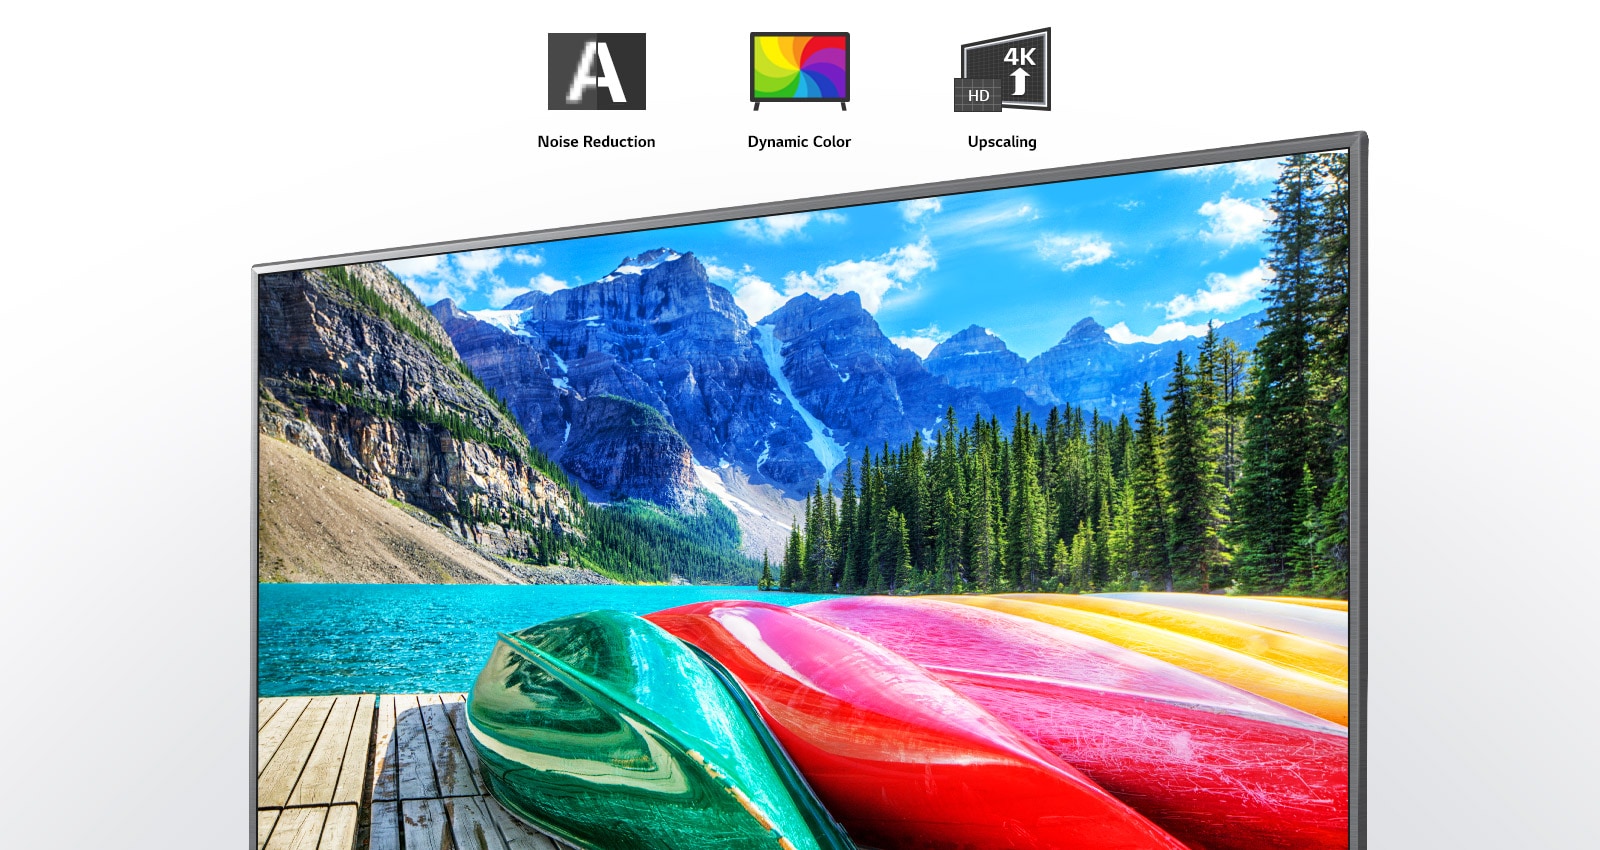 Noise reduction, dynamic colour, and upscaling icons and a TV screen showing a scenic shot of mountains, forest, and a lake.